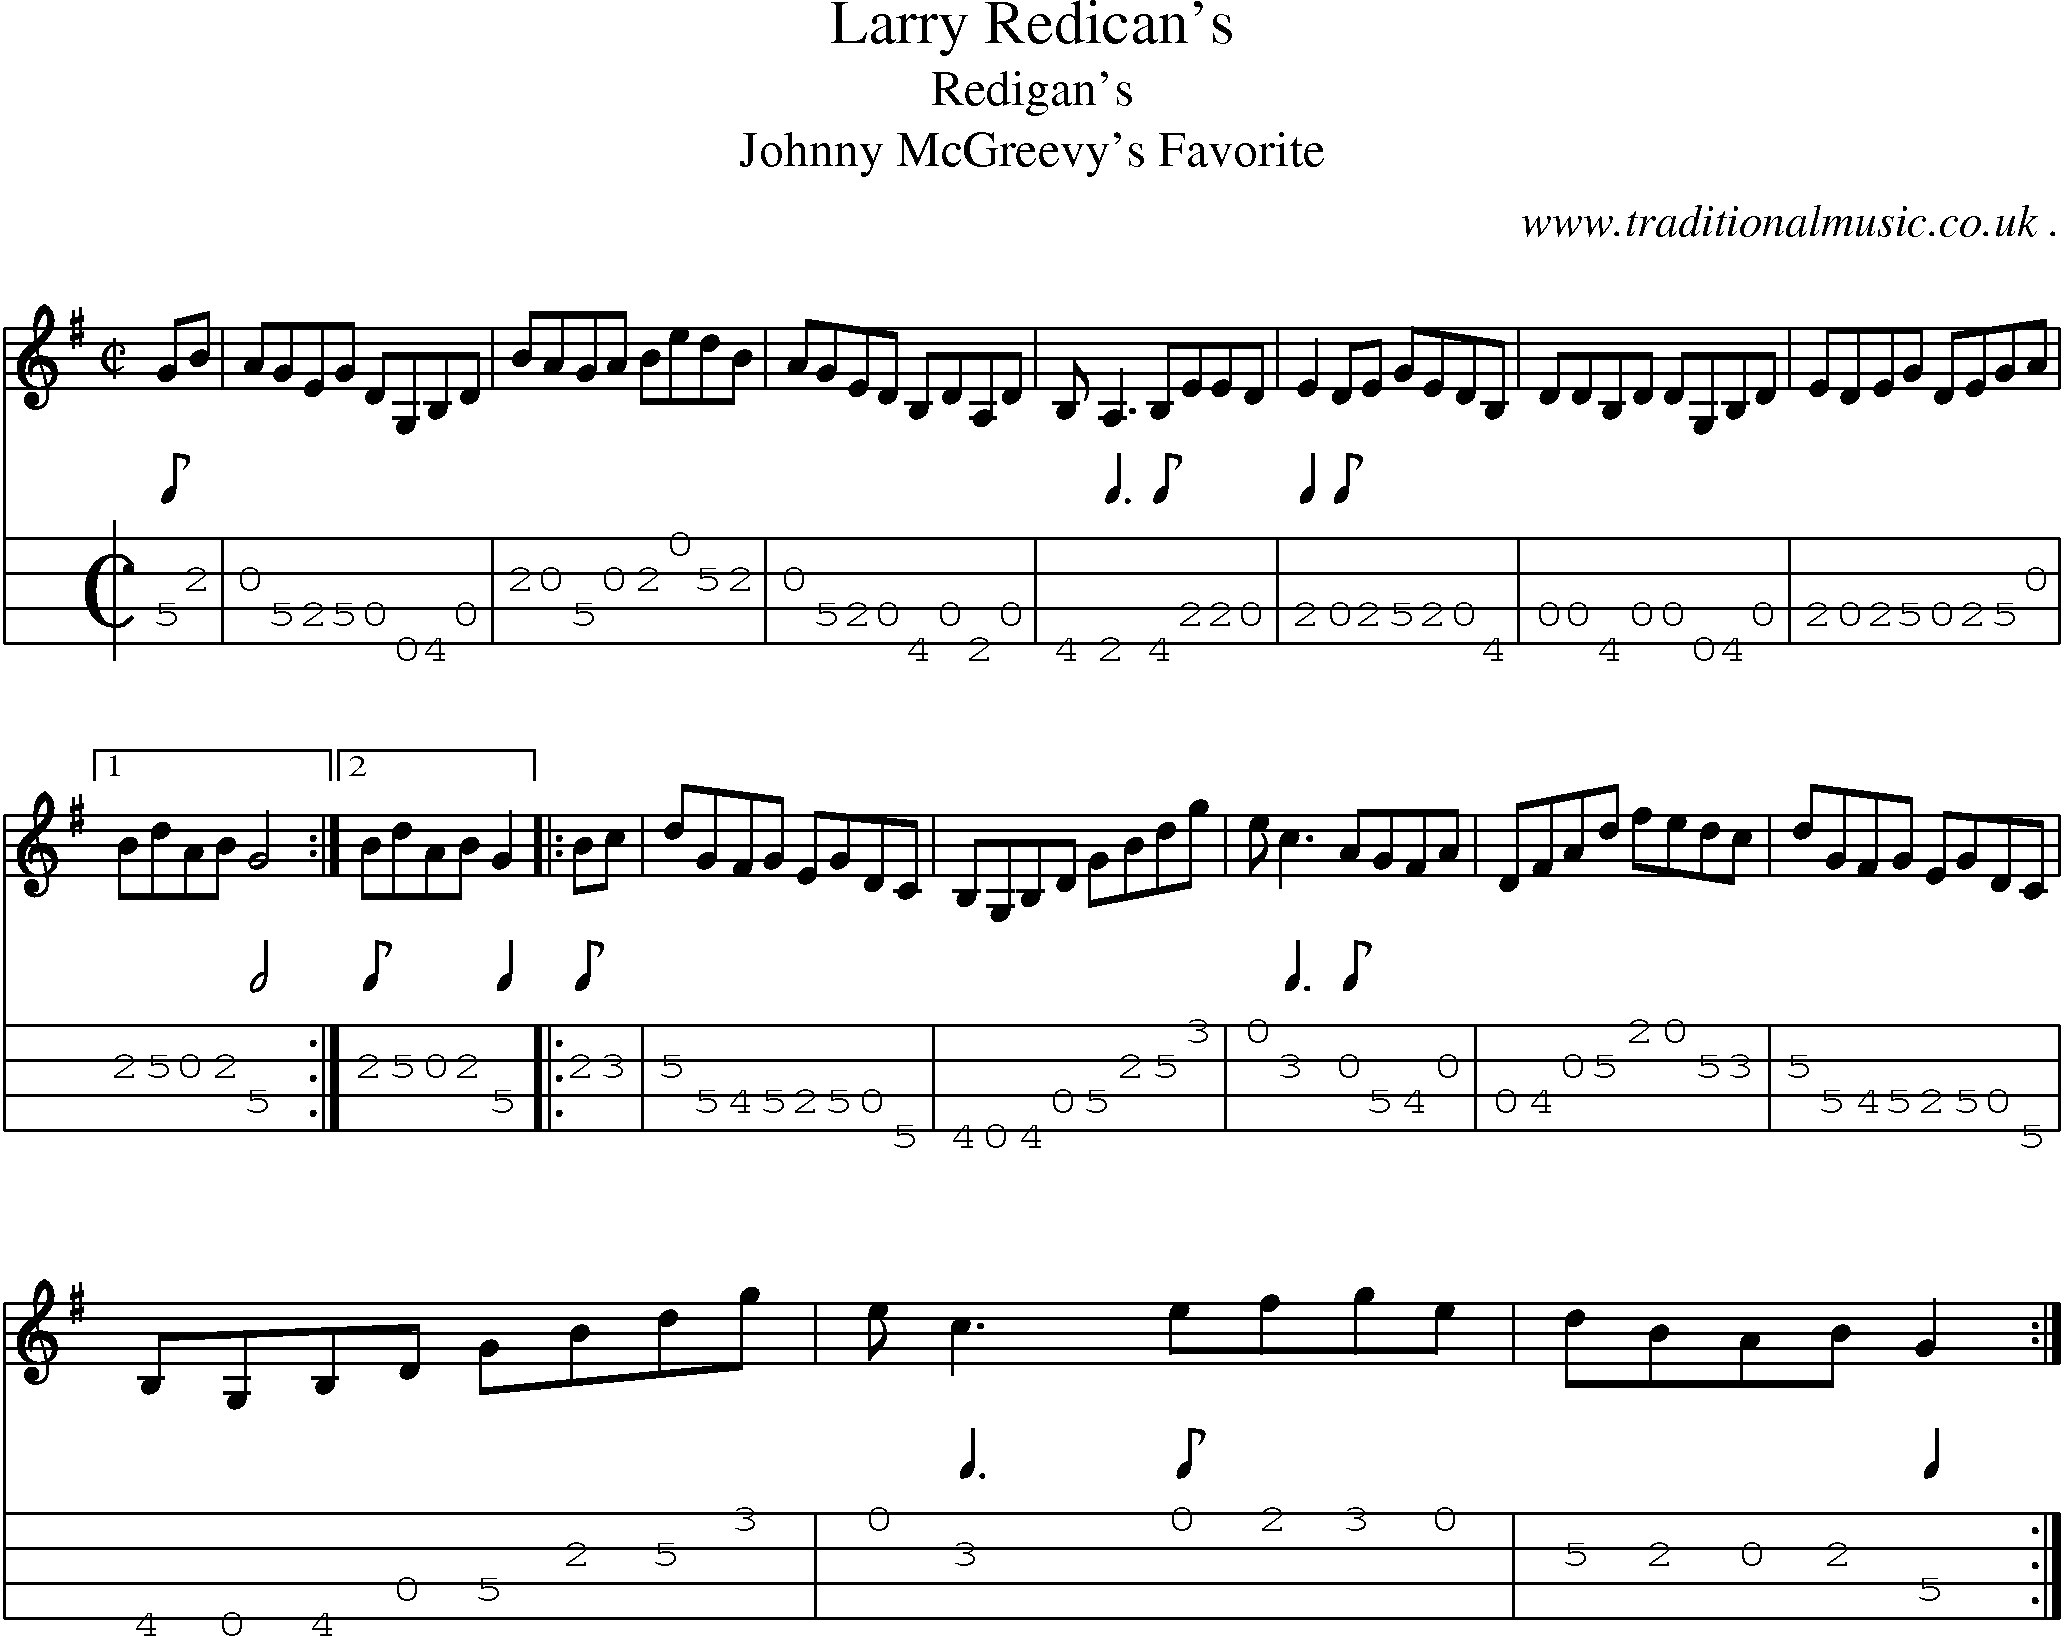 Sheet-Music and Mandolin Tabs for Larry Redicans